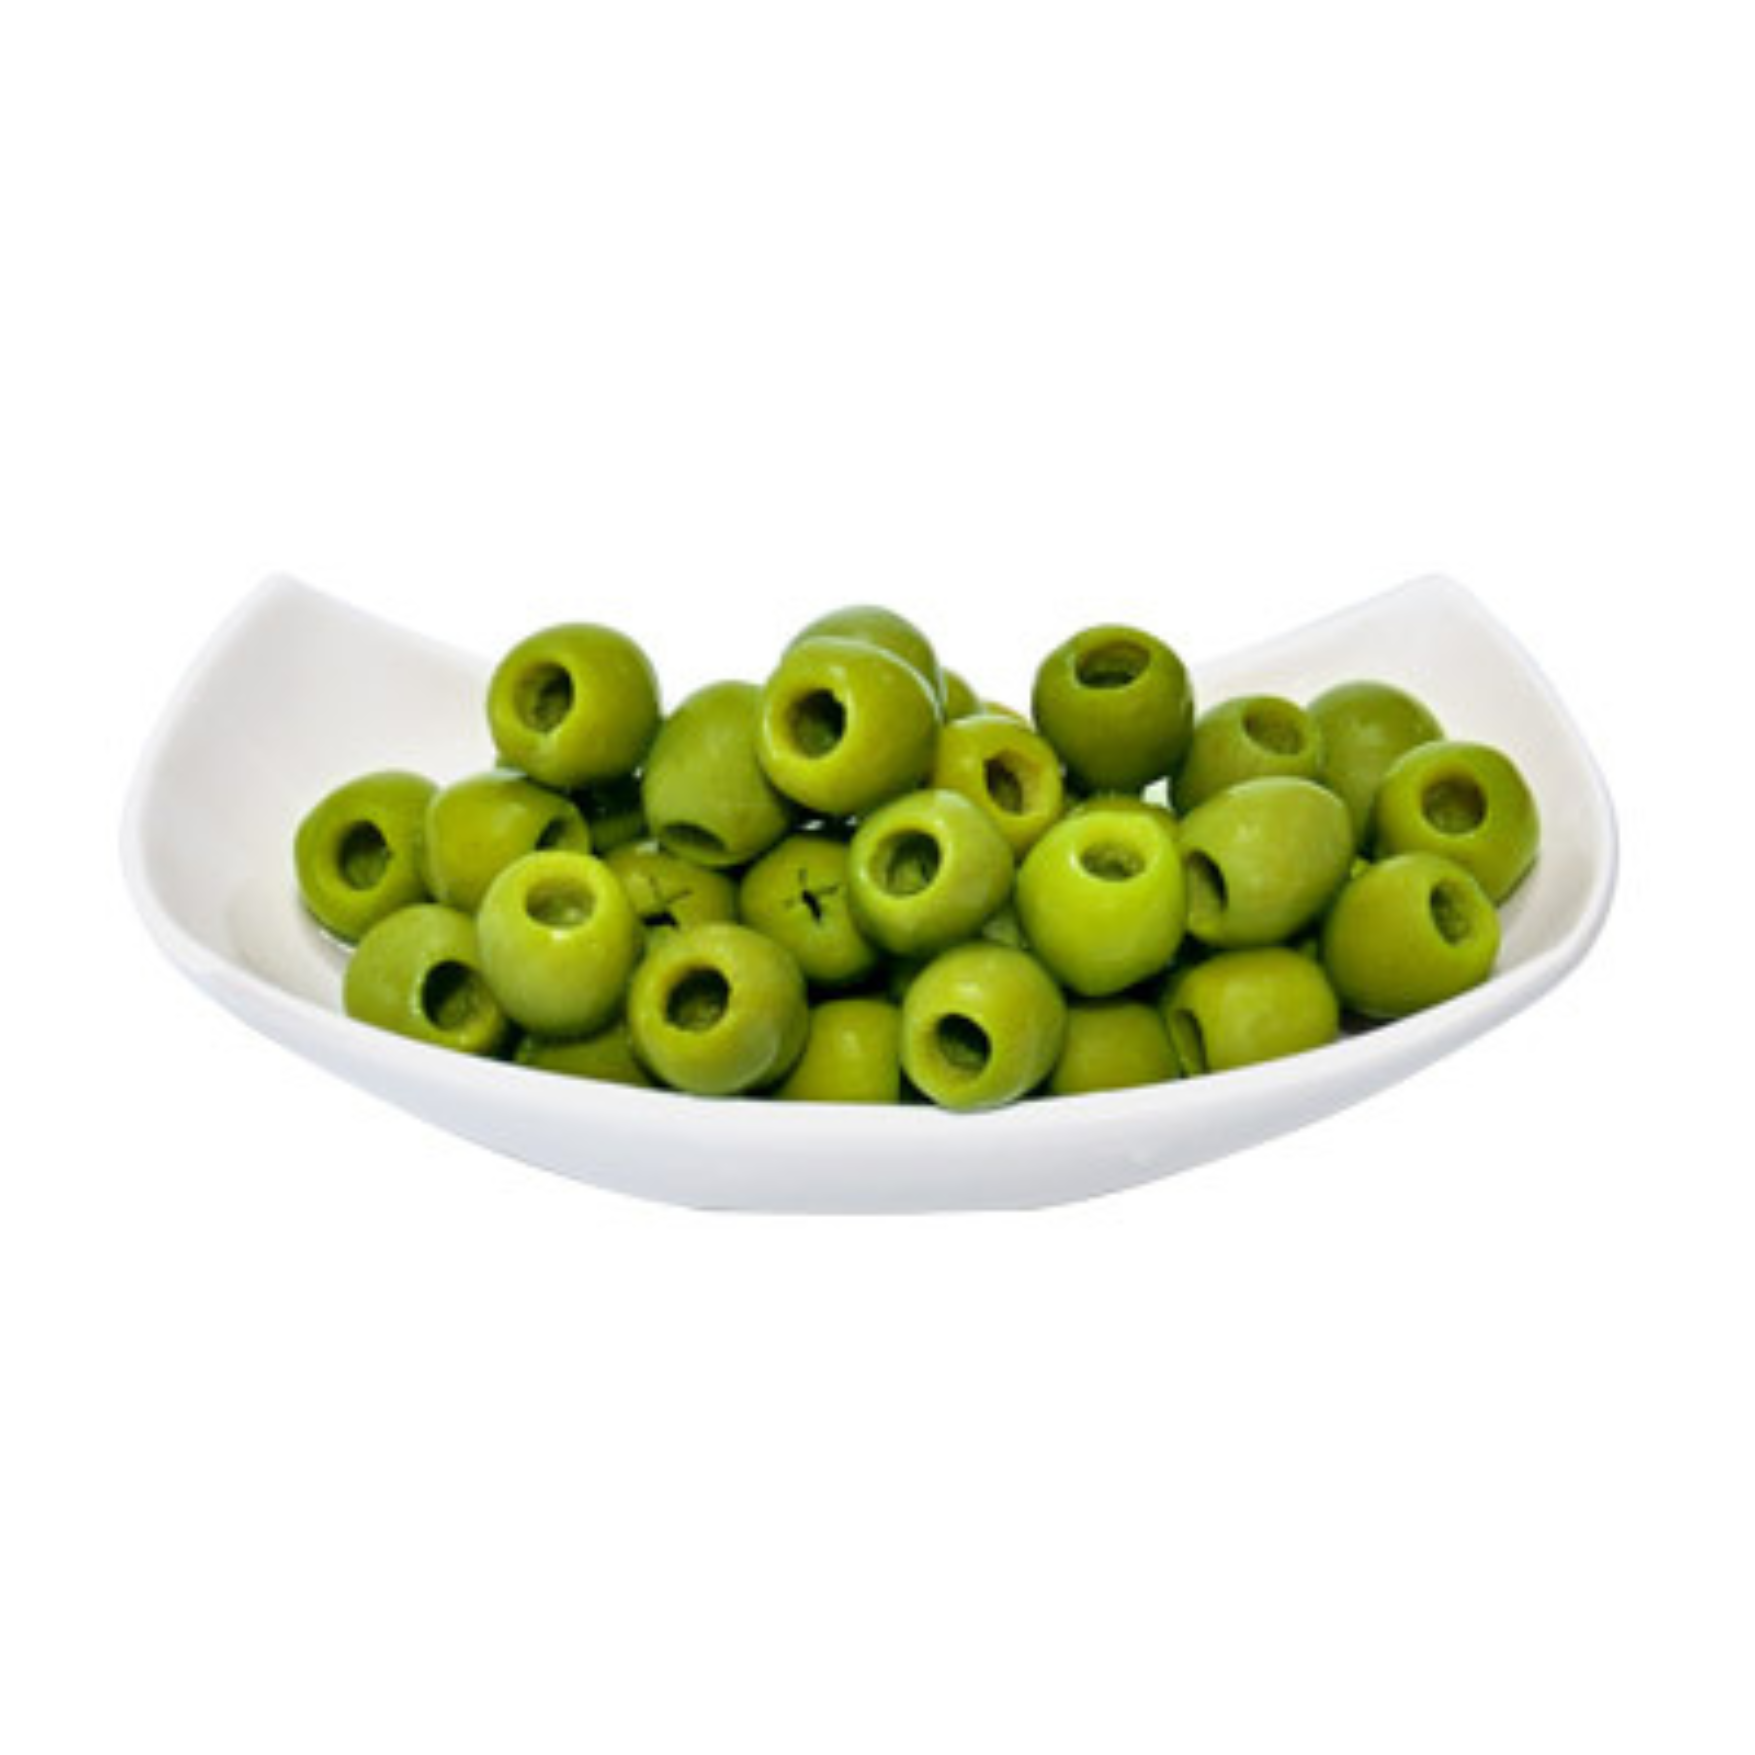 Ficacci Castelvetrano Olives (Pitted)